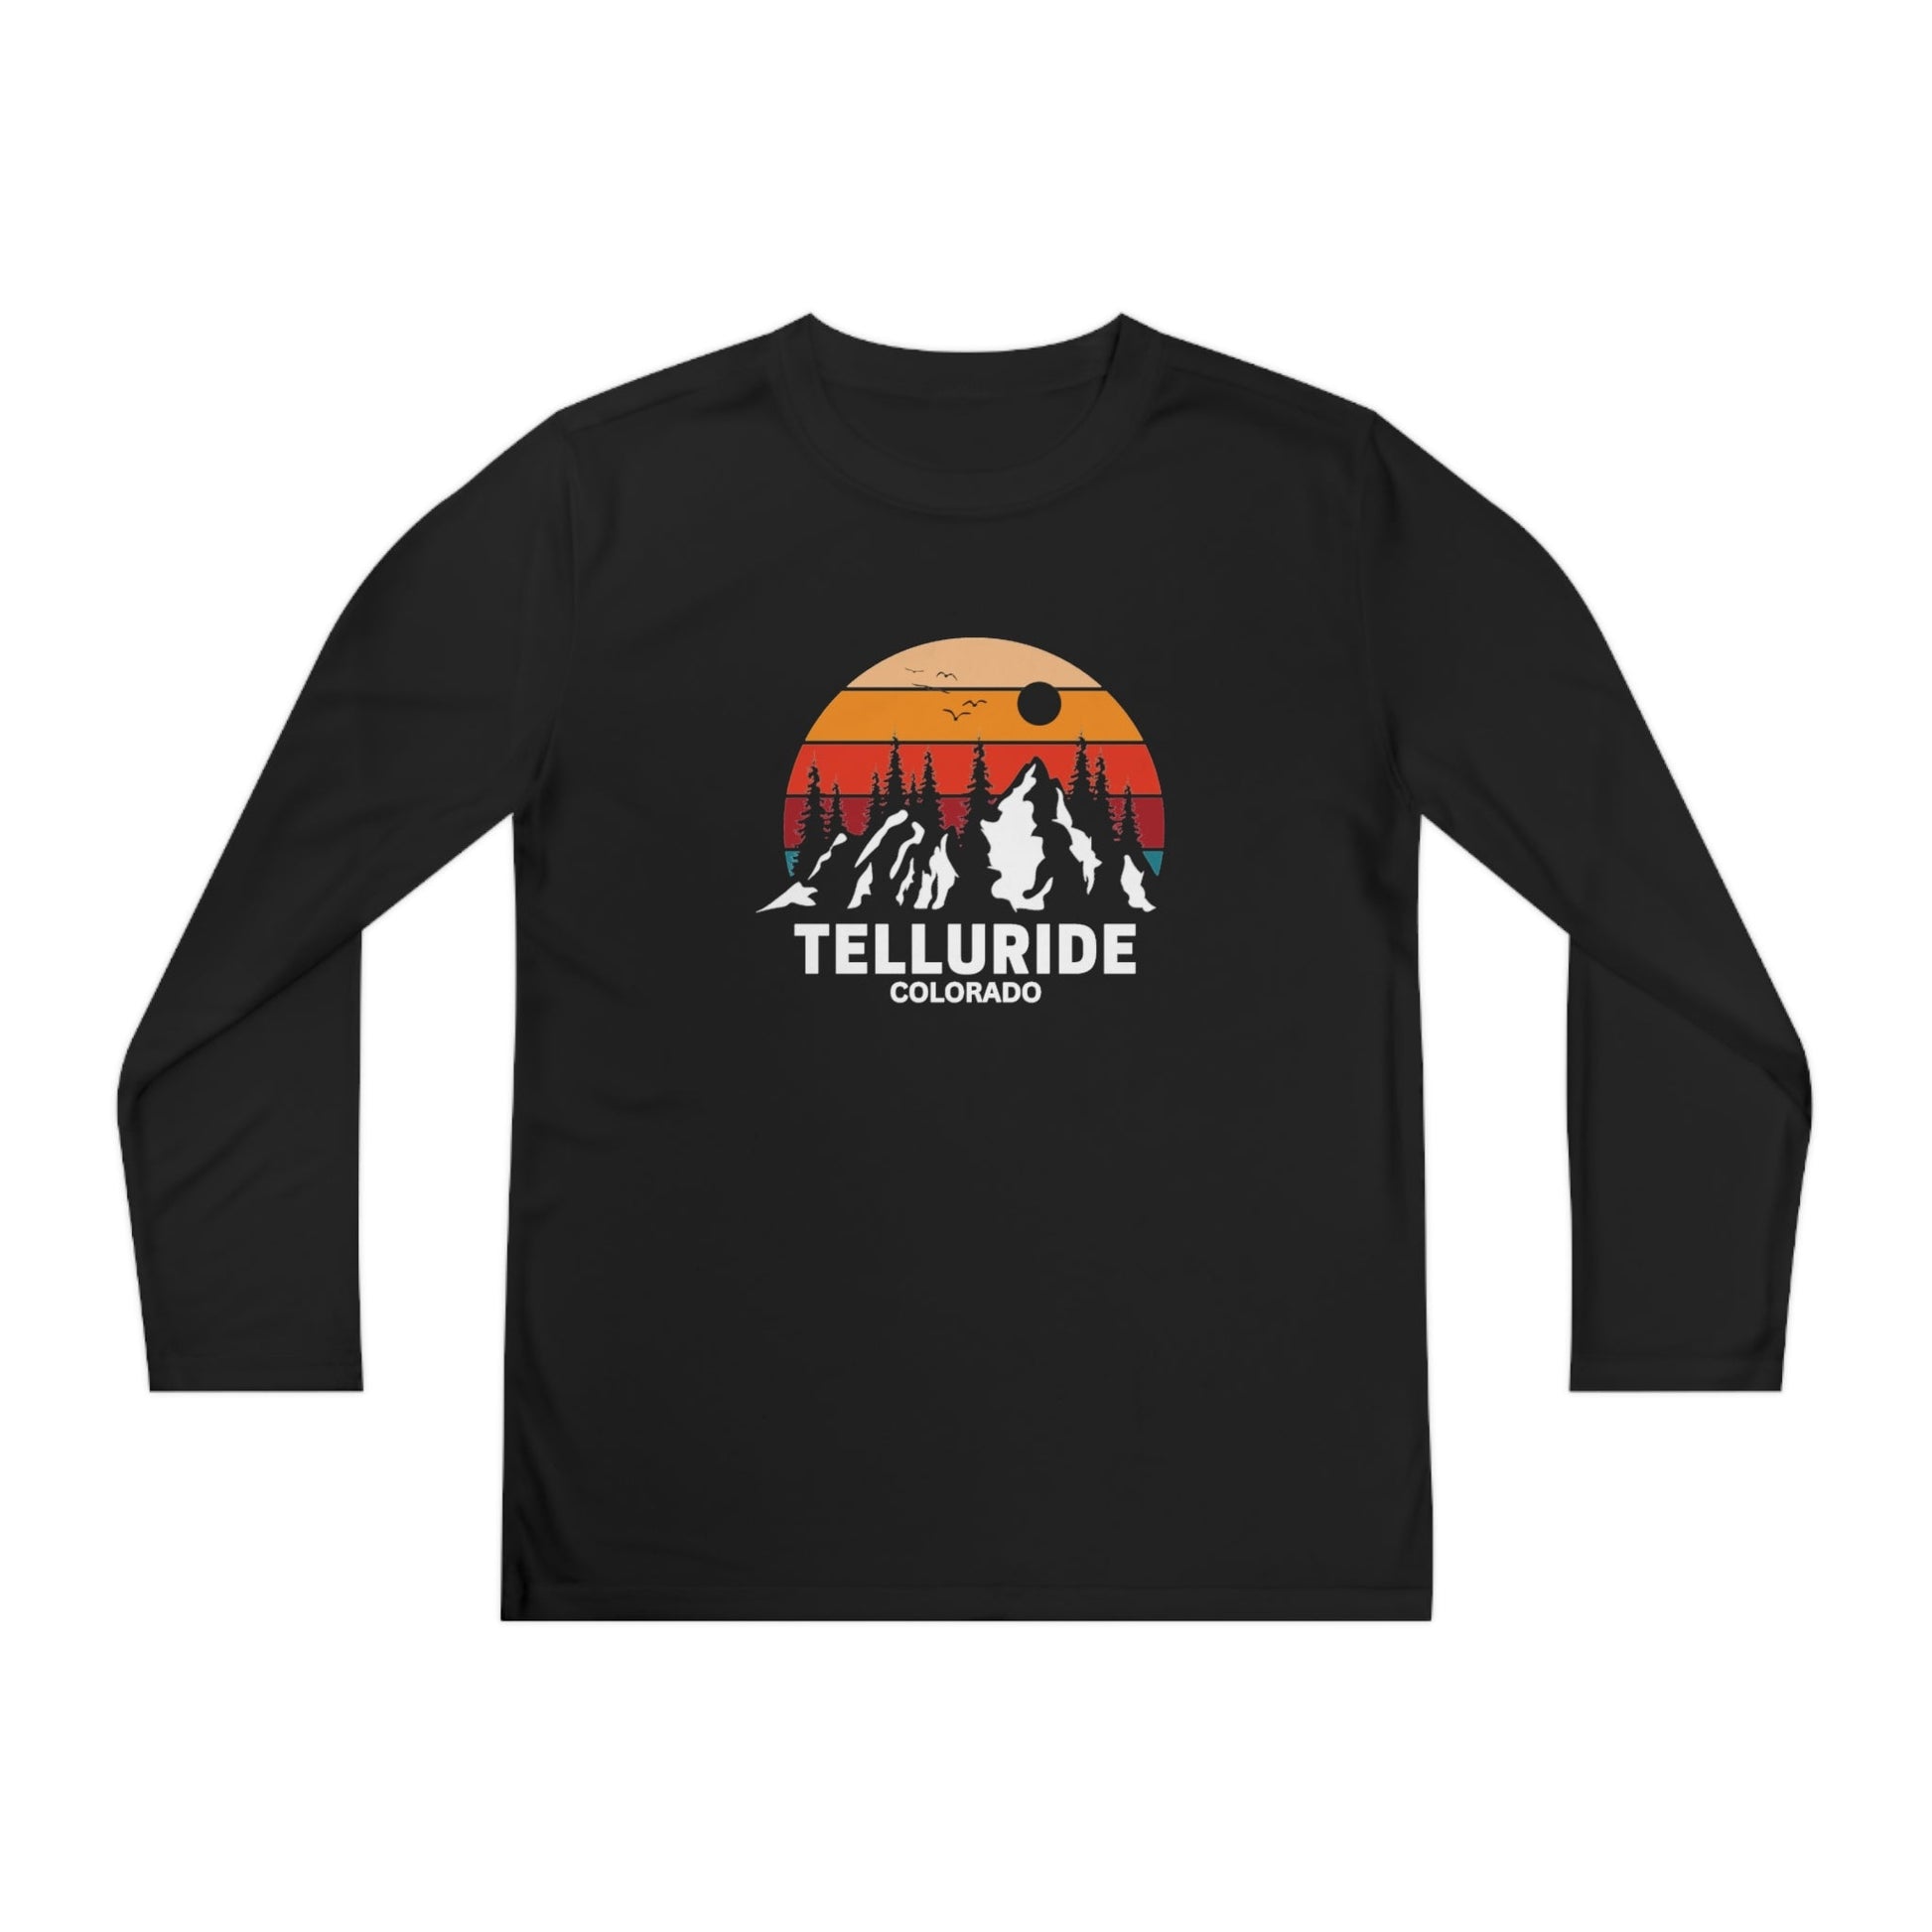 Black kids long-sleeve shirt with the words "Telluride Colorado" in white lettering and a picture of the mountains with a colorful sunset in the background. The shirt is a stylish and comfortable way to show your love of skiing, hiking or snowboarding at the Telluride Ski Resort. 